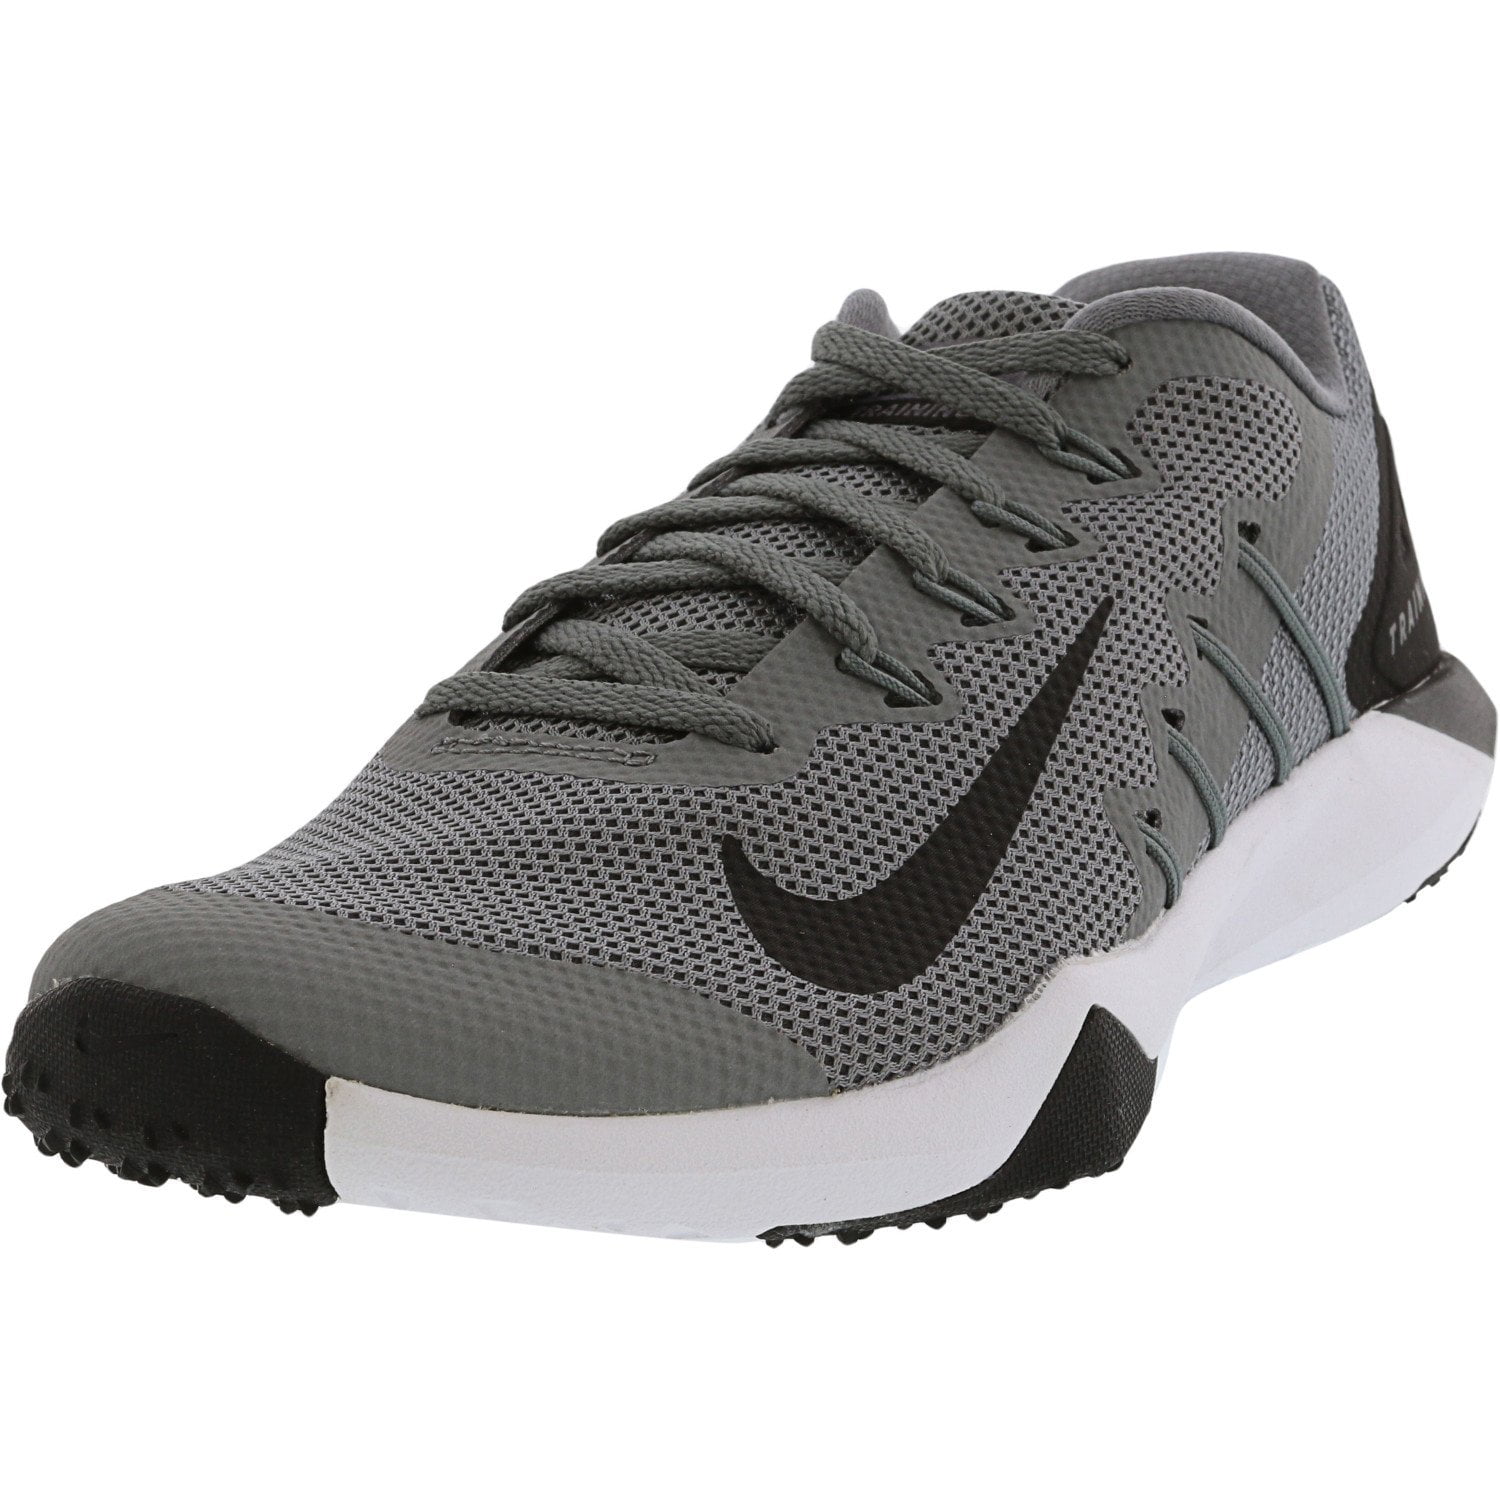 Black Wolf Ankle-High Training Shoes 